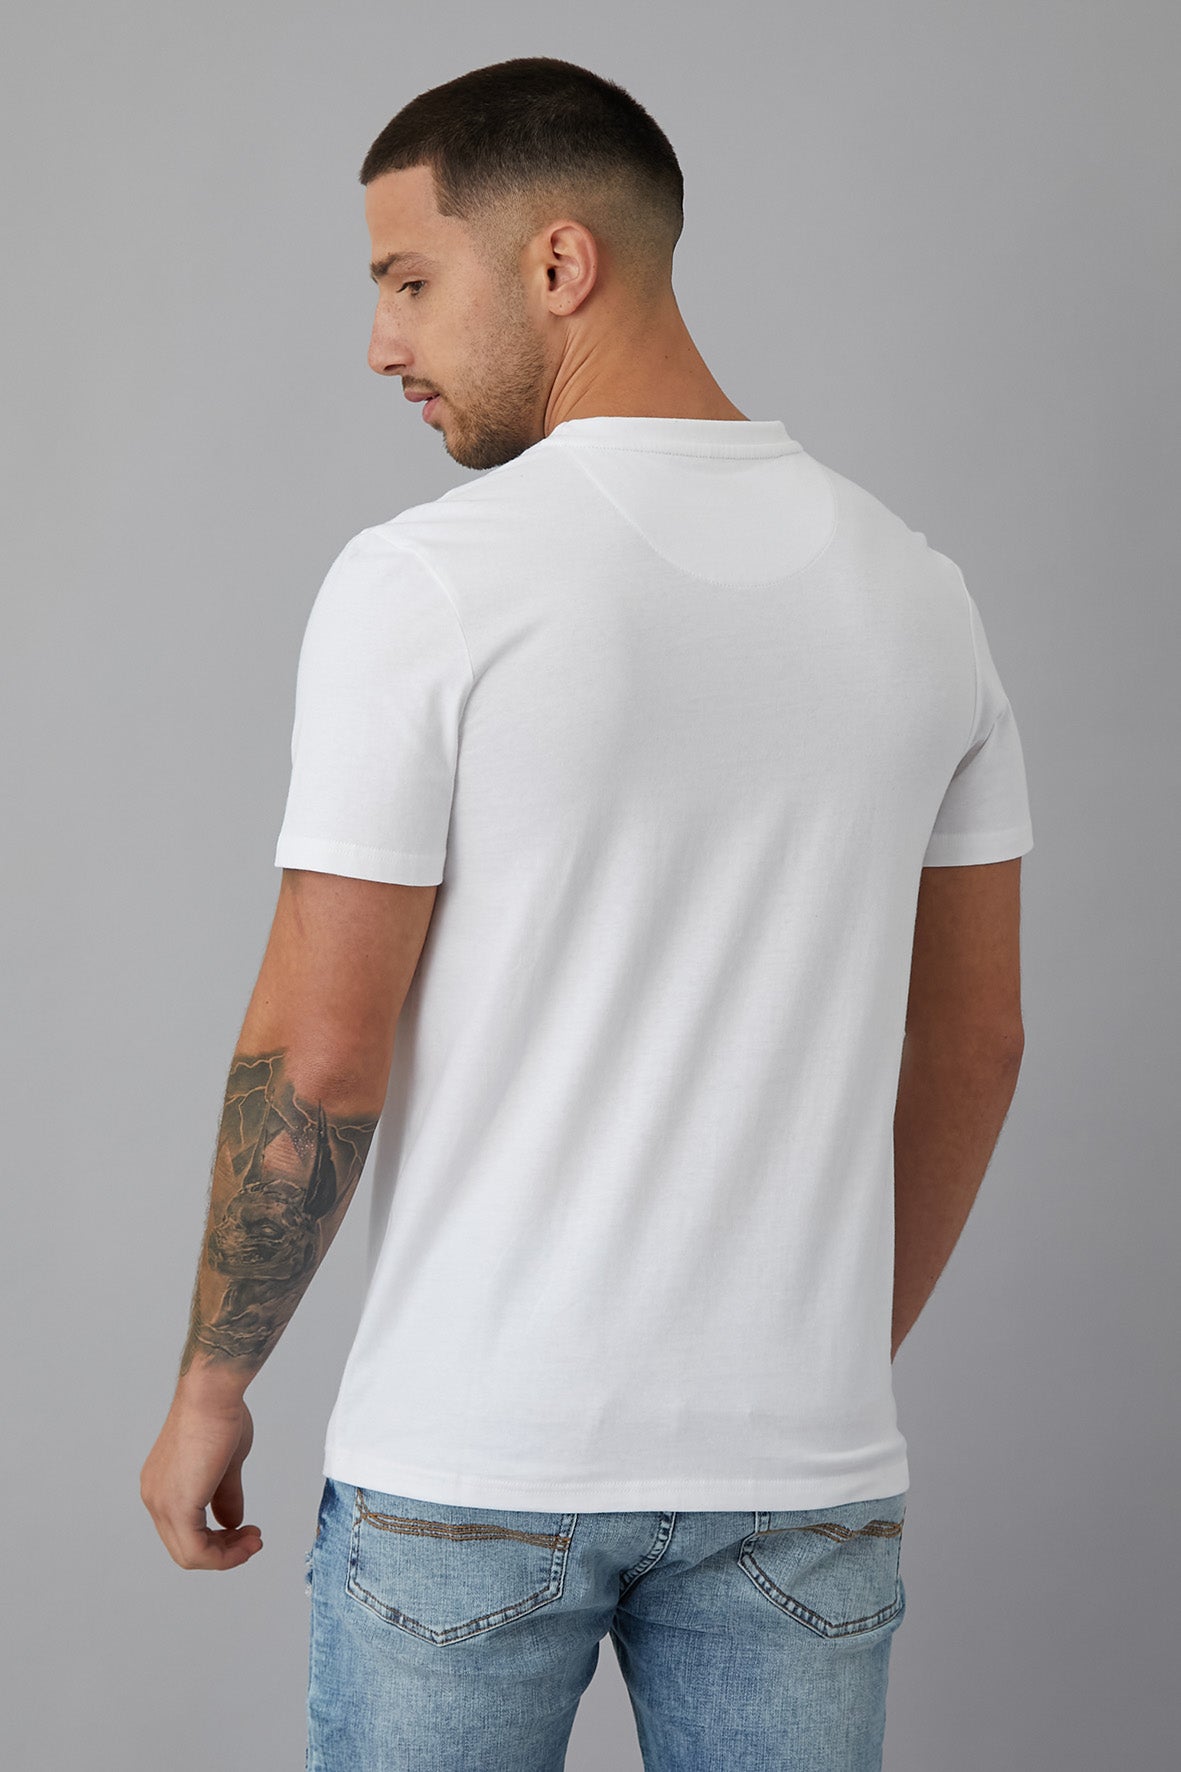 FUTURE Printed crew neck t-shirt in OPTIC WHITE - DML Jeans 